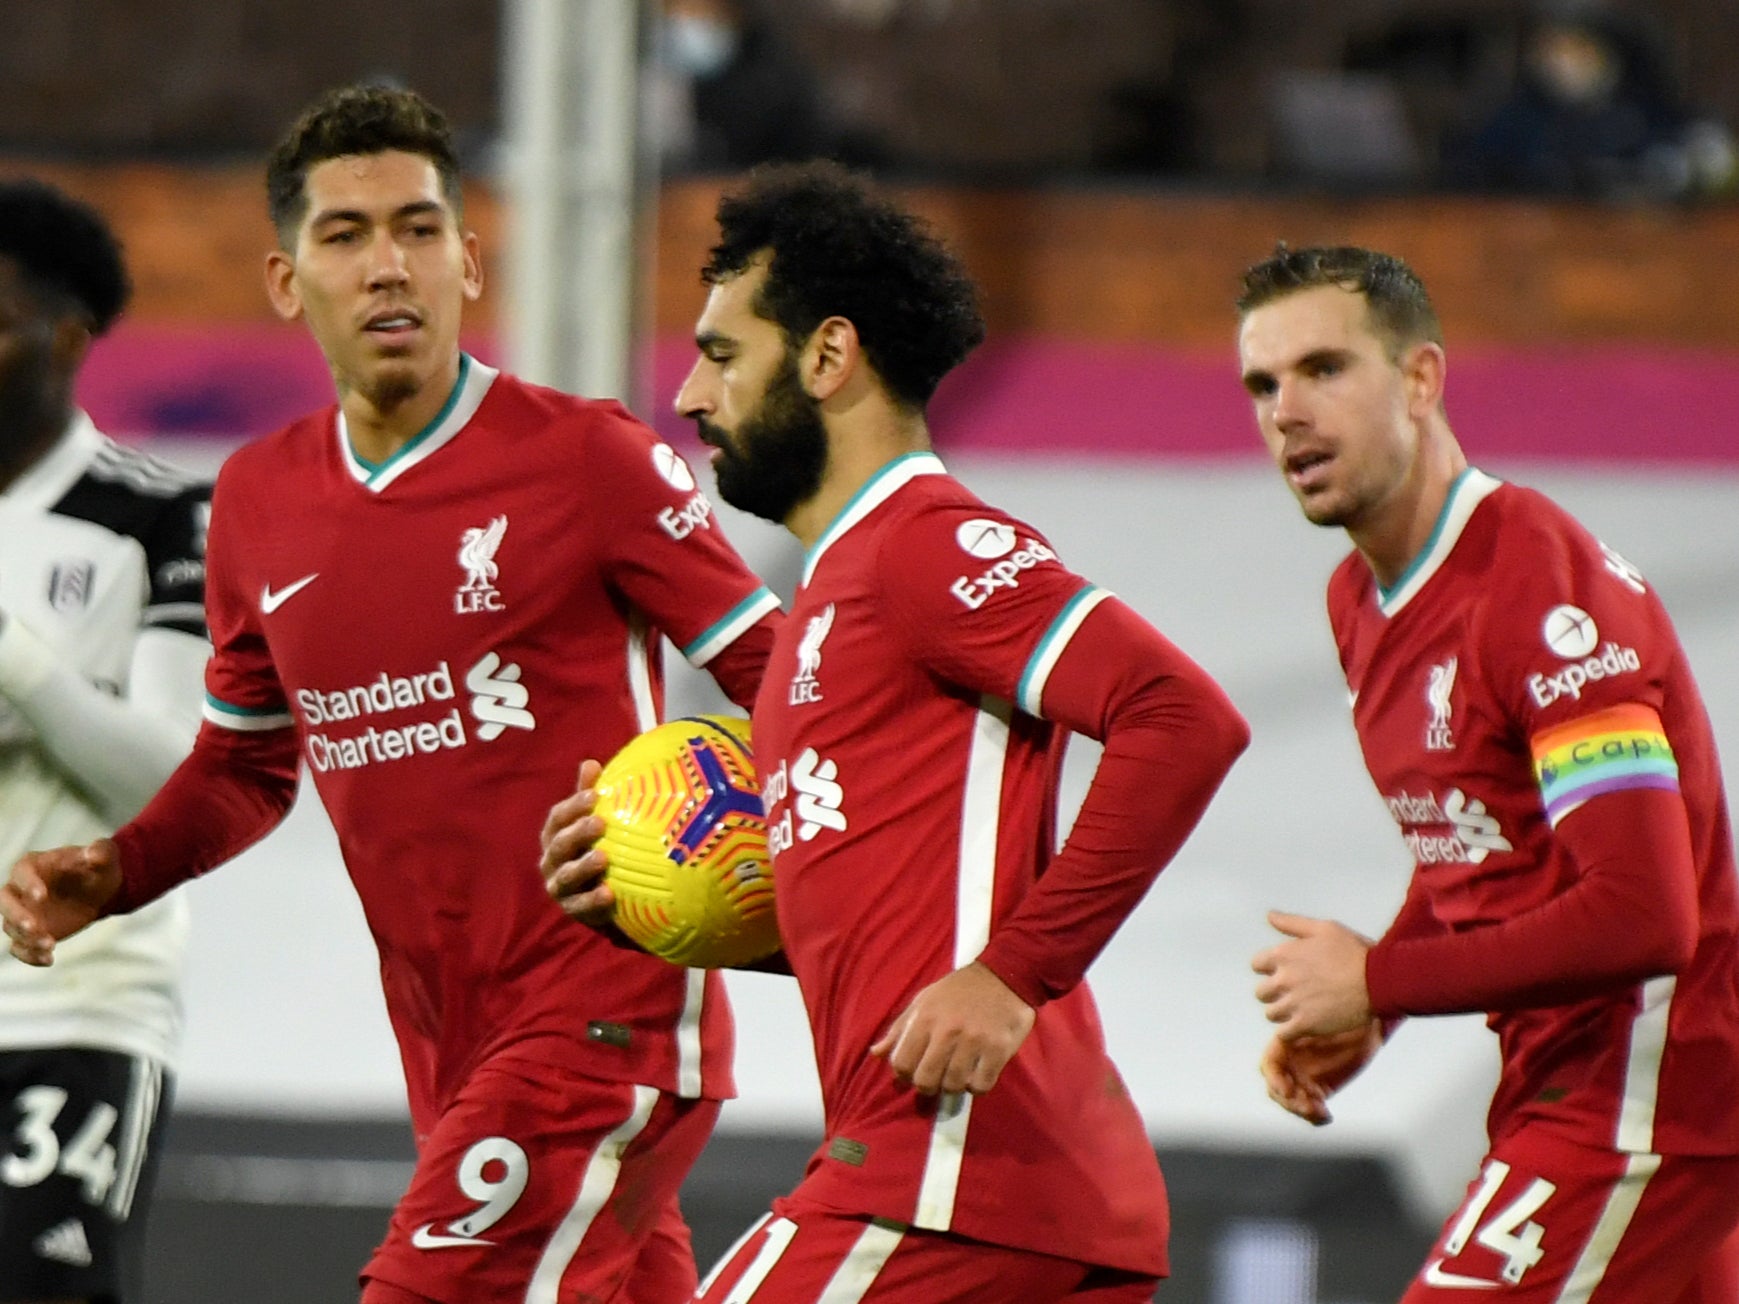 Mohamed Salah retrieves the ball after scoring the penalty